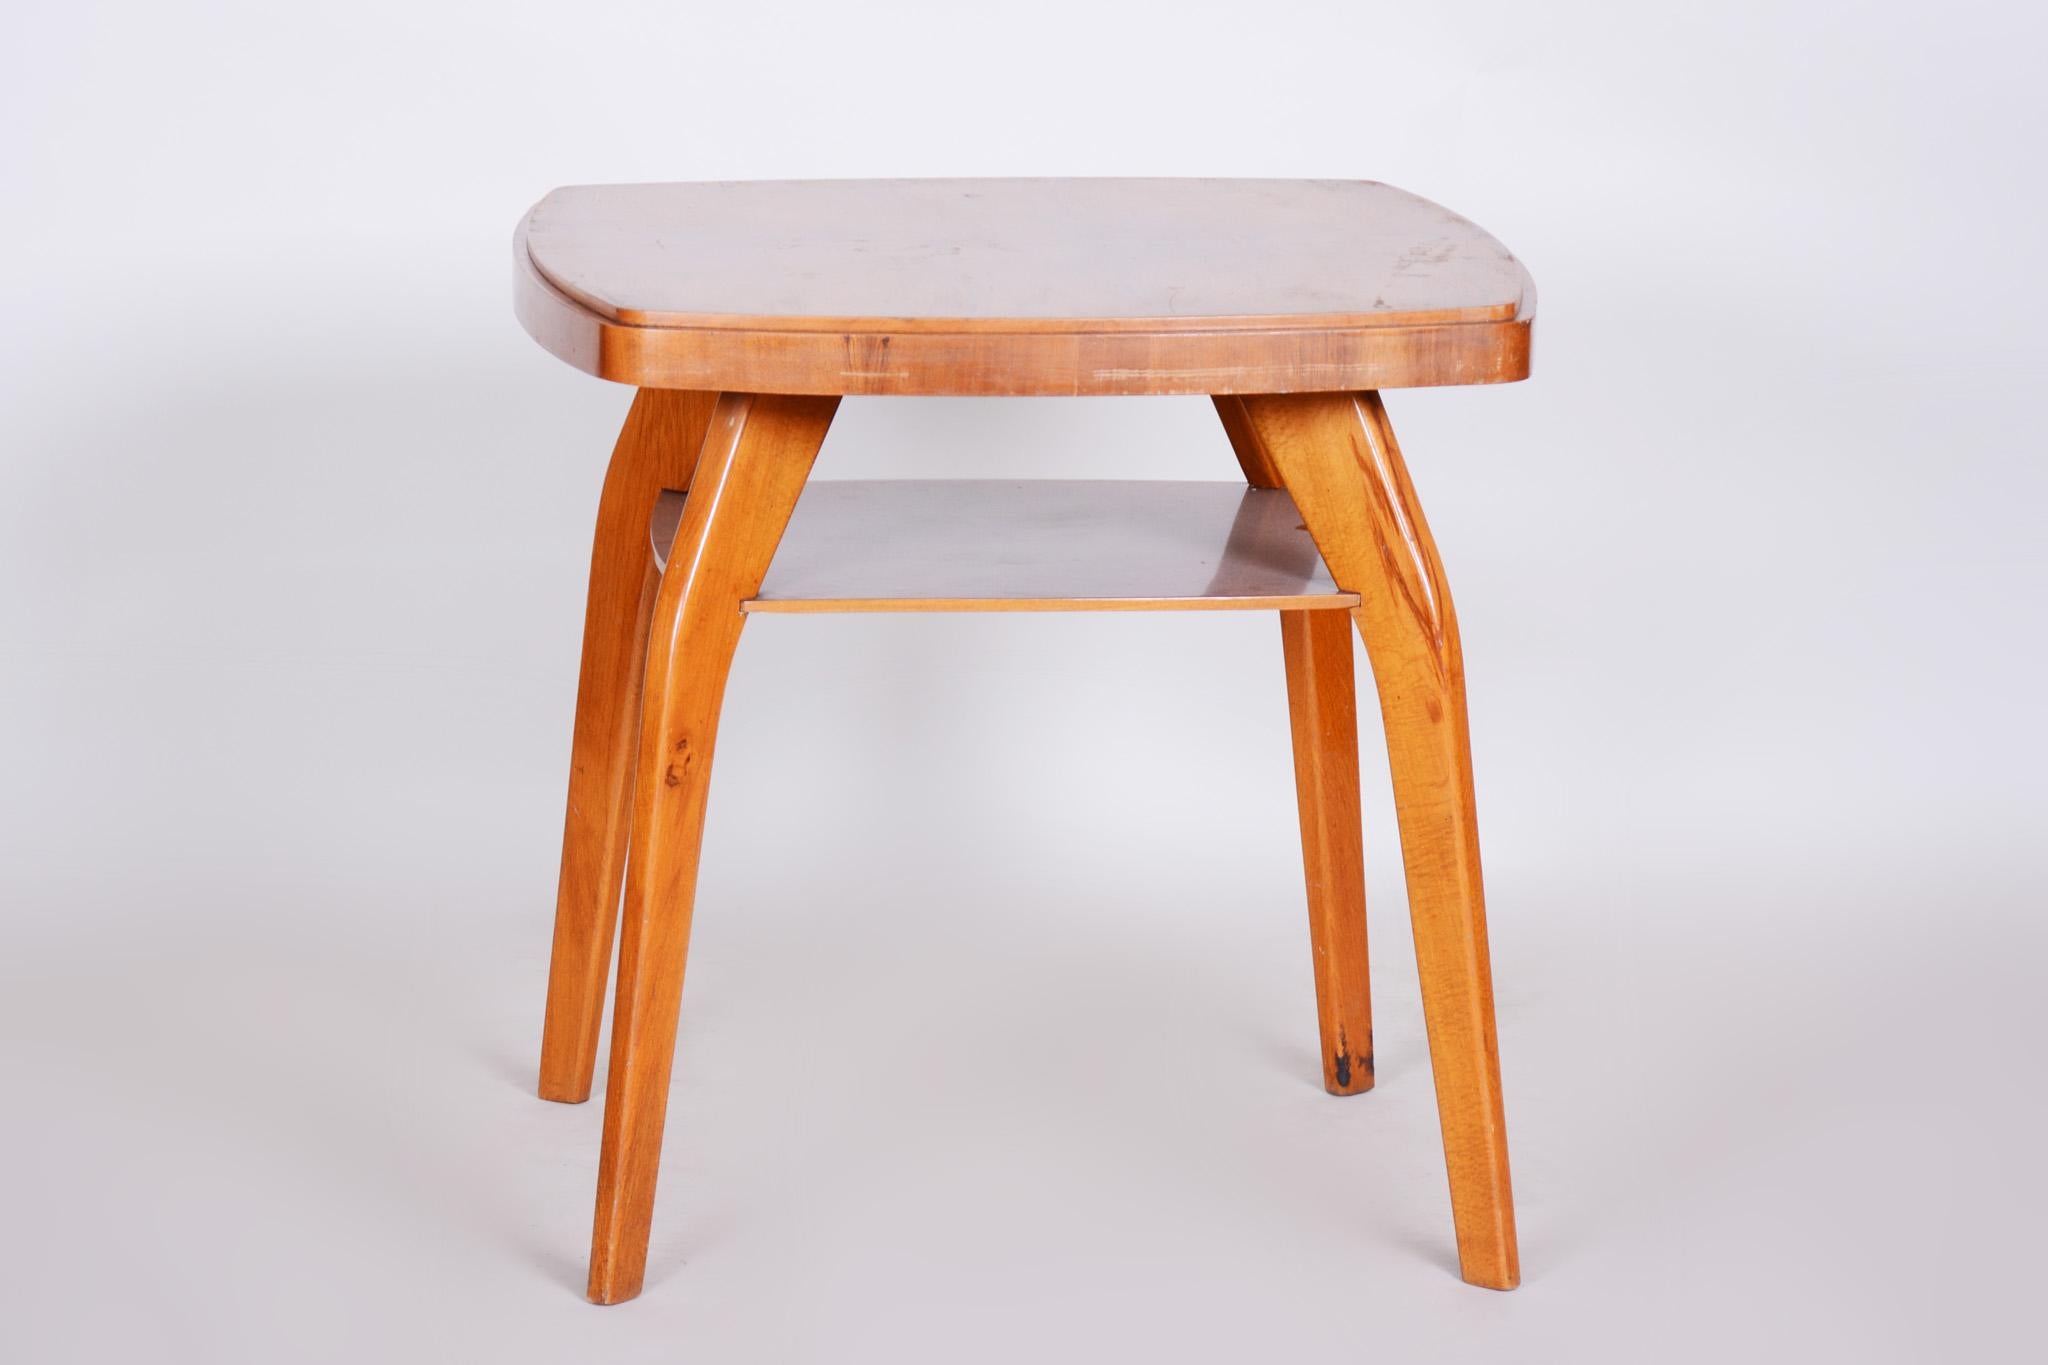 Small table.
Czech midcentury
Material: Walnut and beech
Period: 1950-1959.